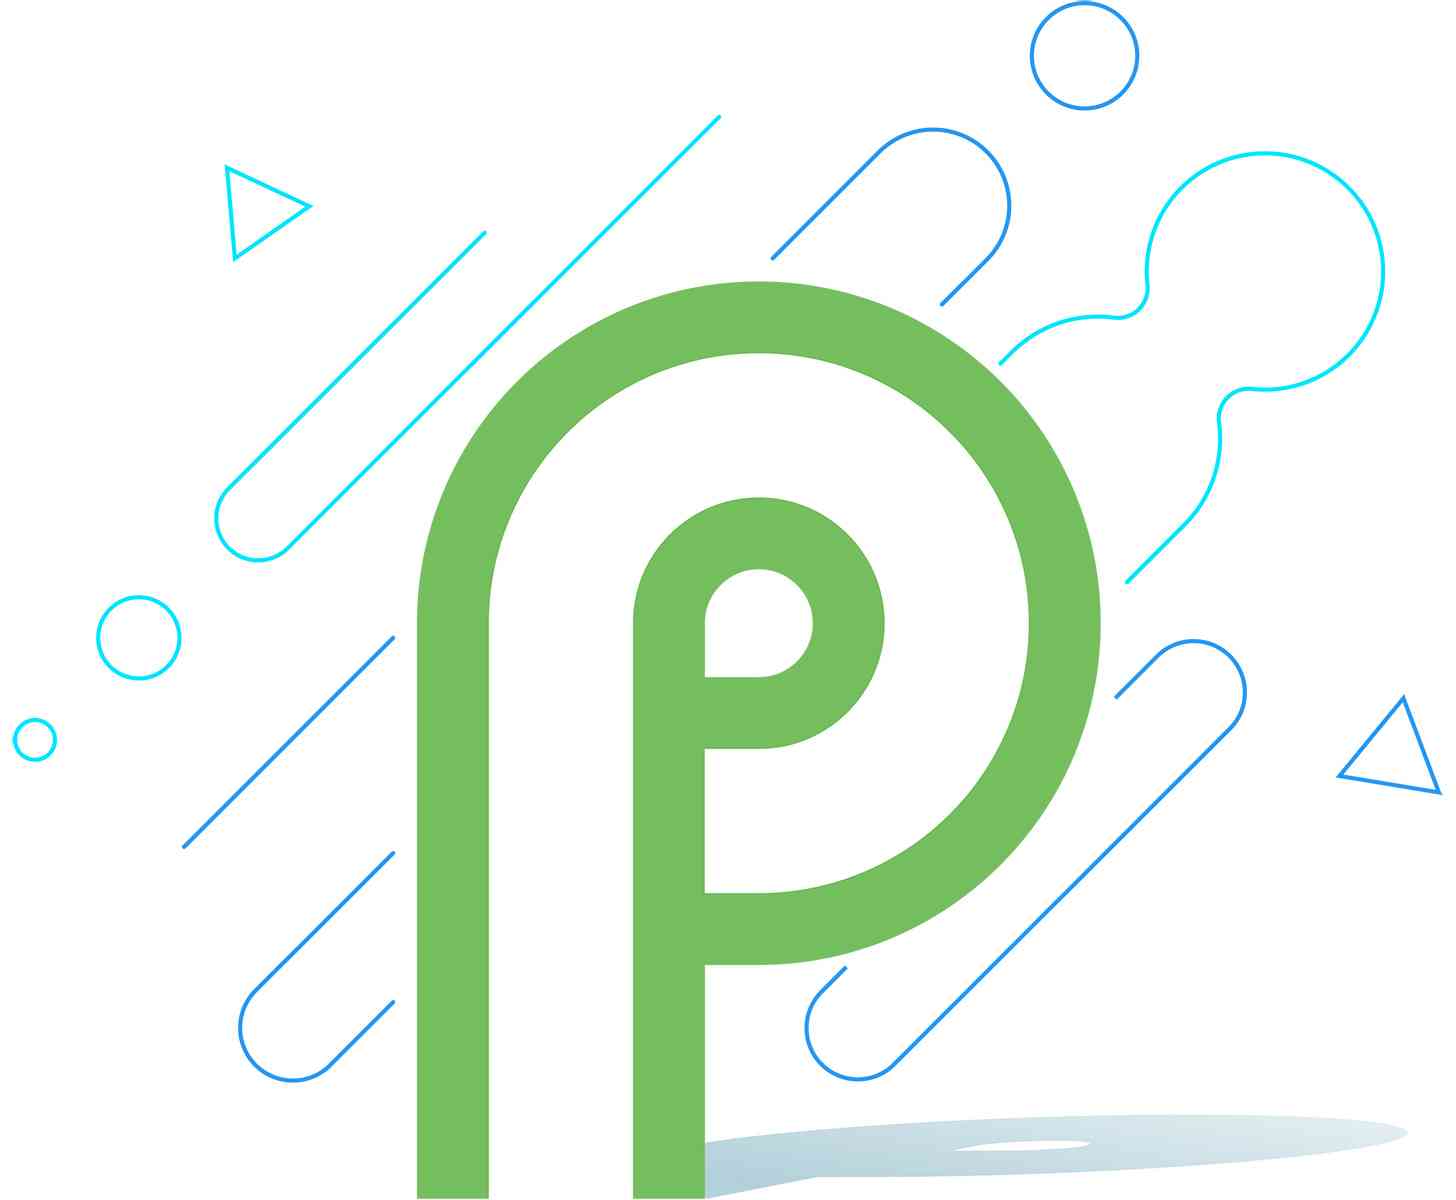 Android P official logo